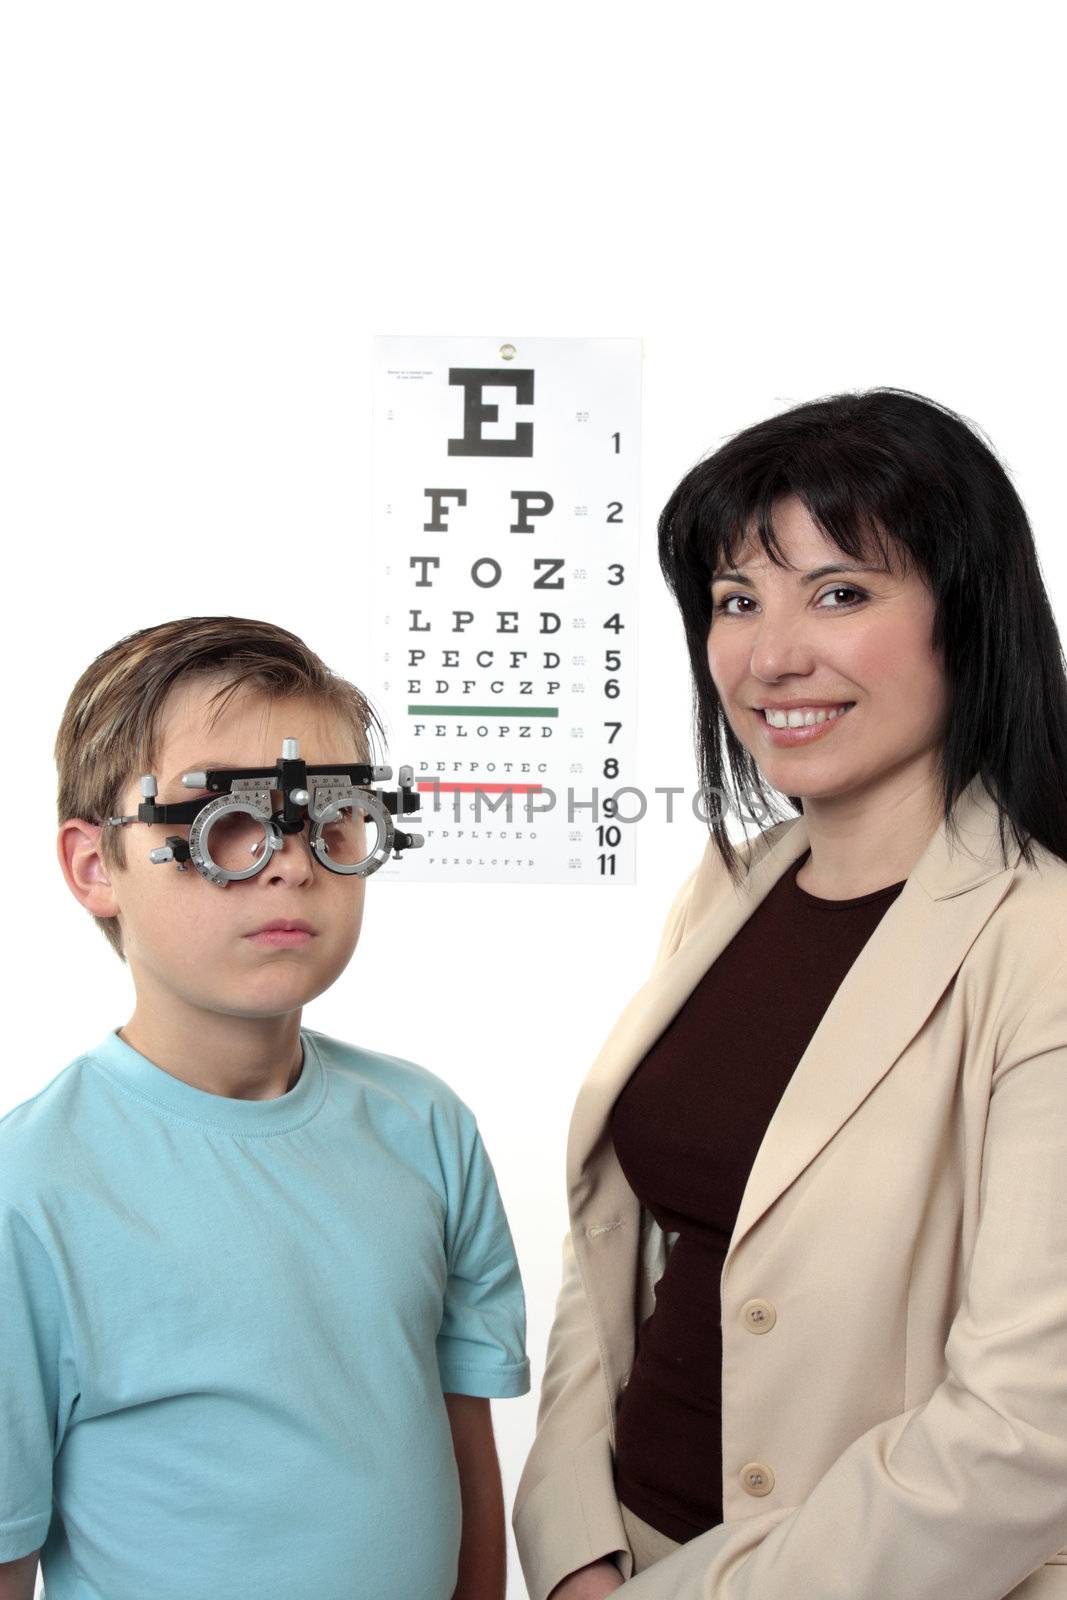 An eye doctor stands with a patient who is wearing trial frames during examination.